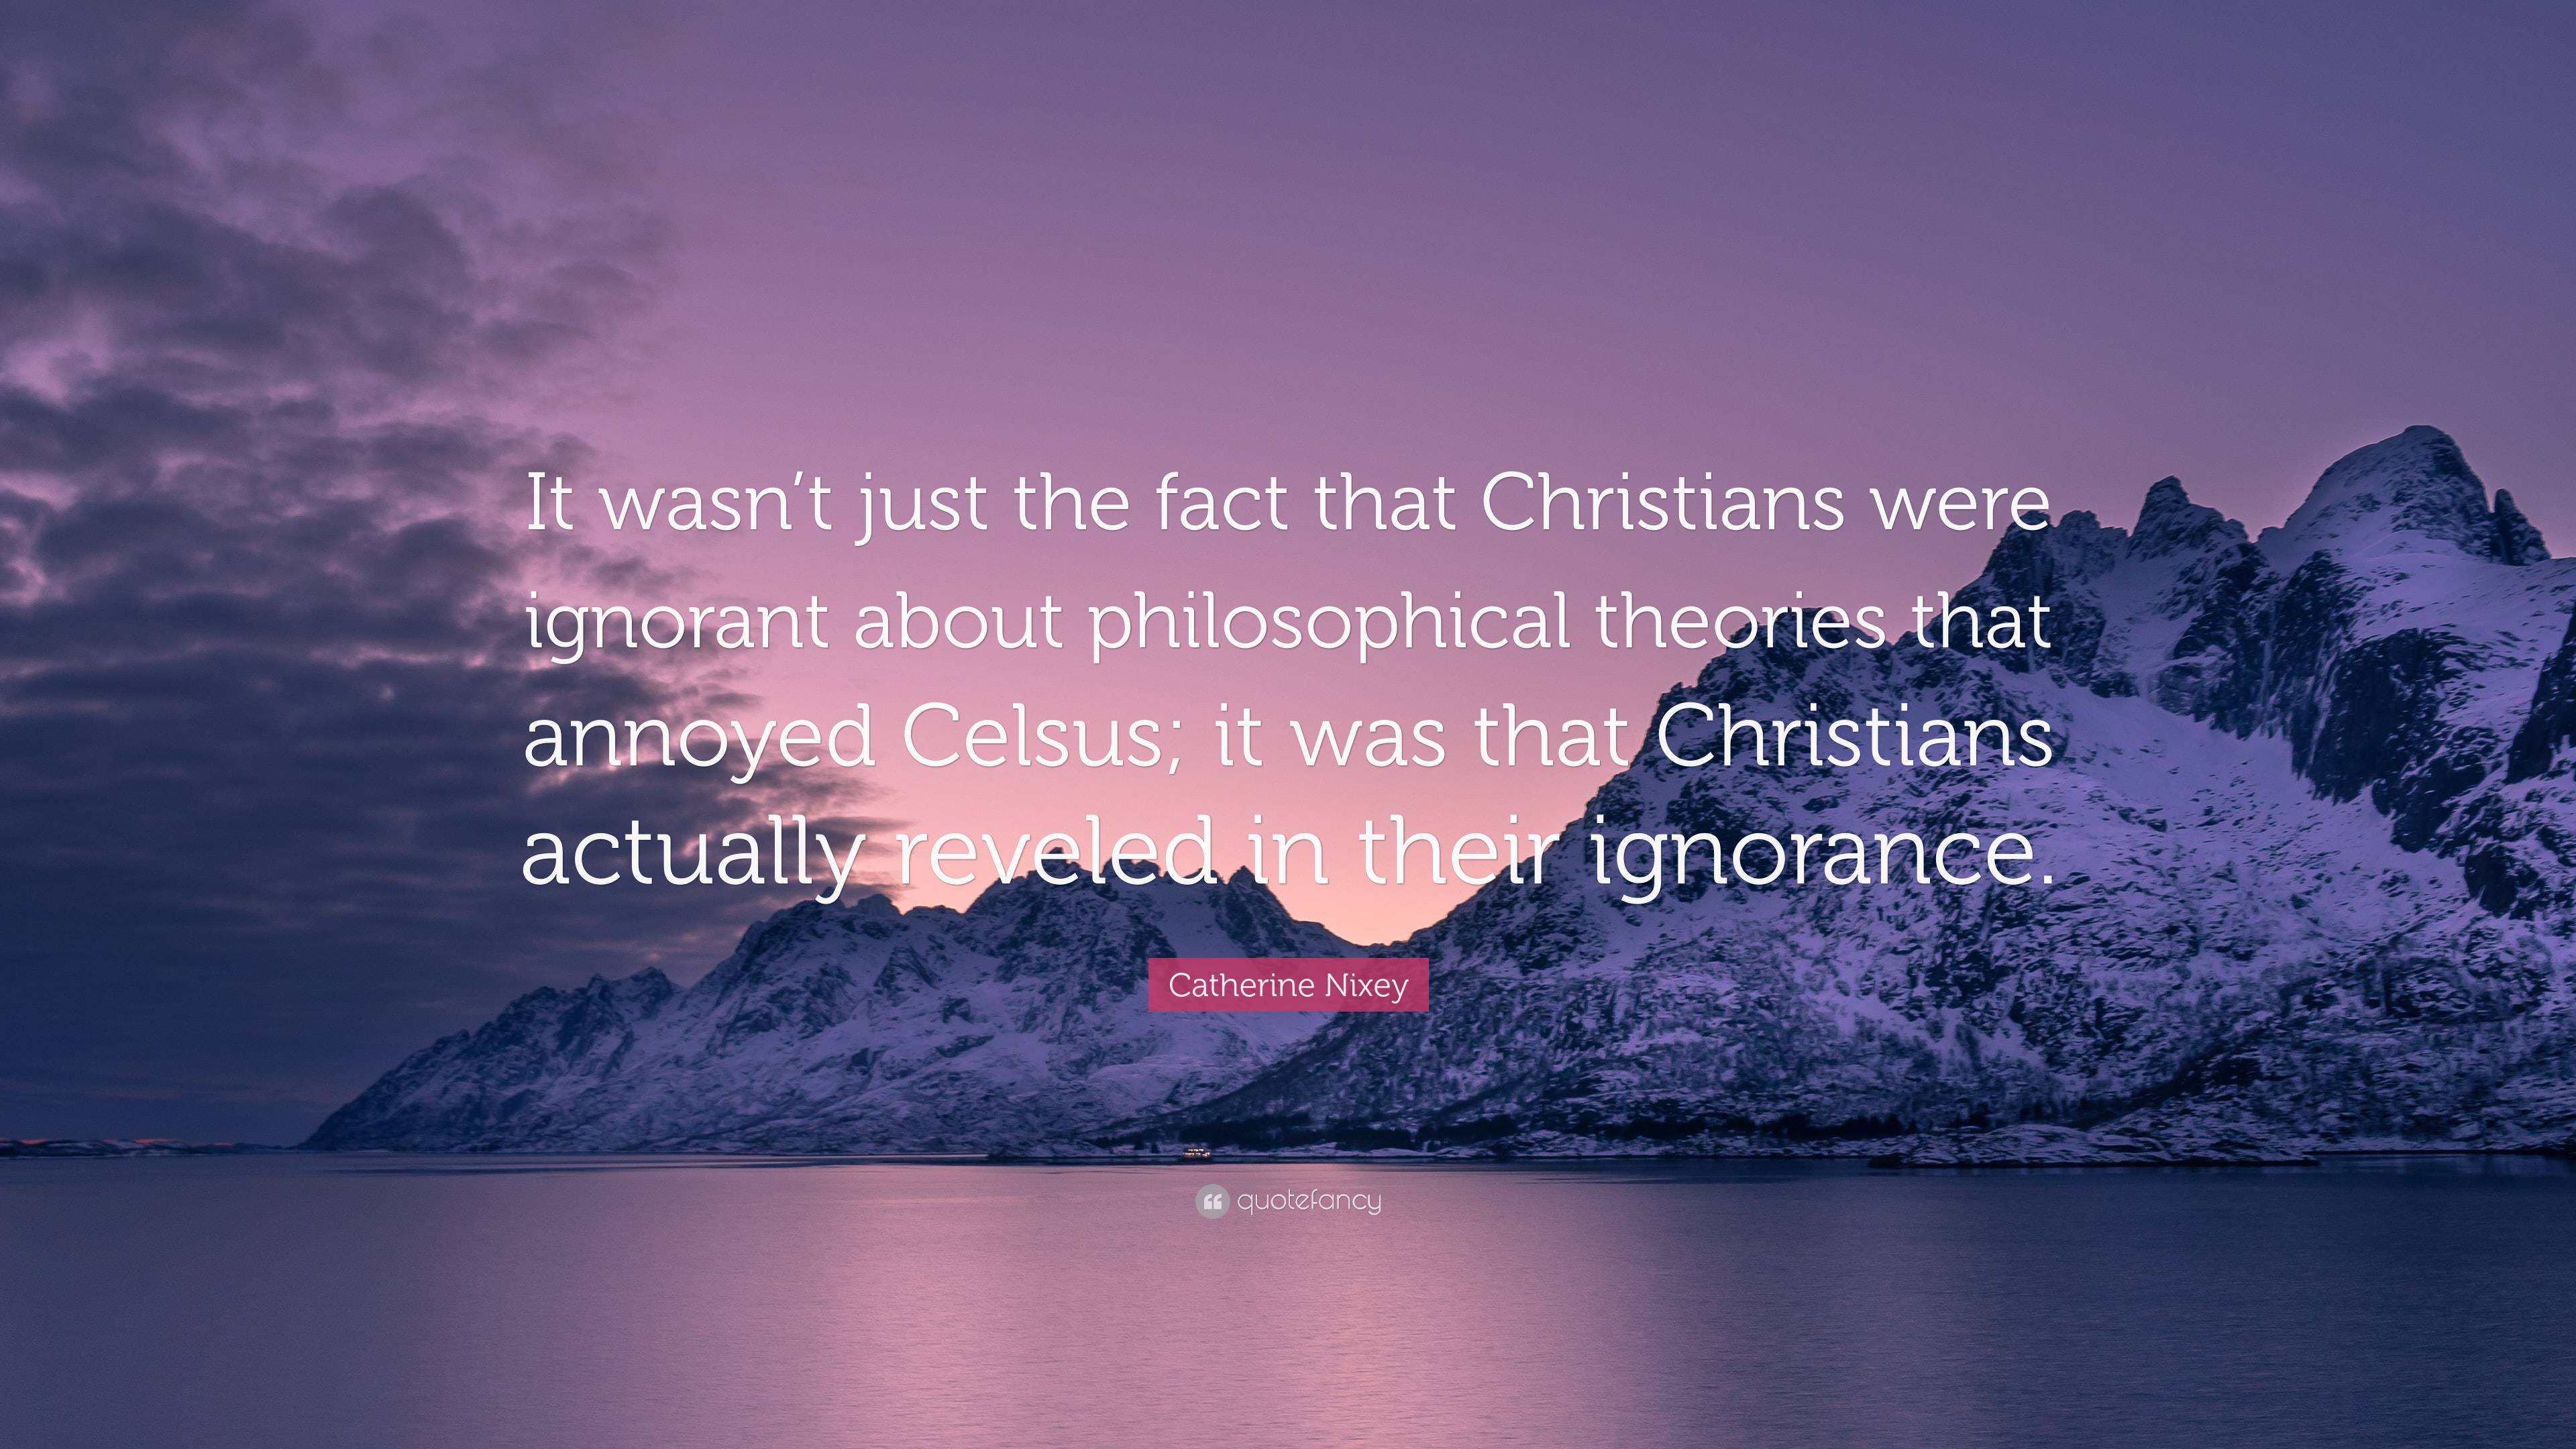 Catherine Nixey Quote It wasnt just the fact that Christians were  ignorant about philosophical theories that annoyed Celsus it was that  Chri